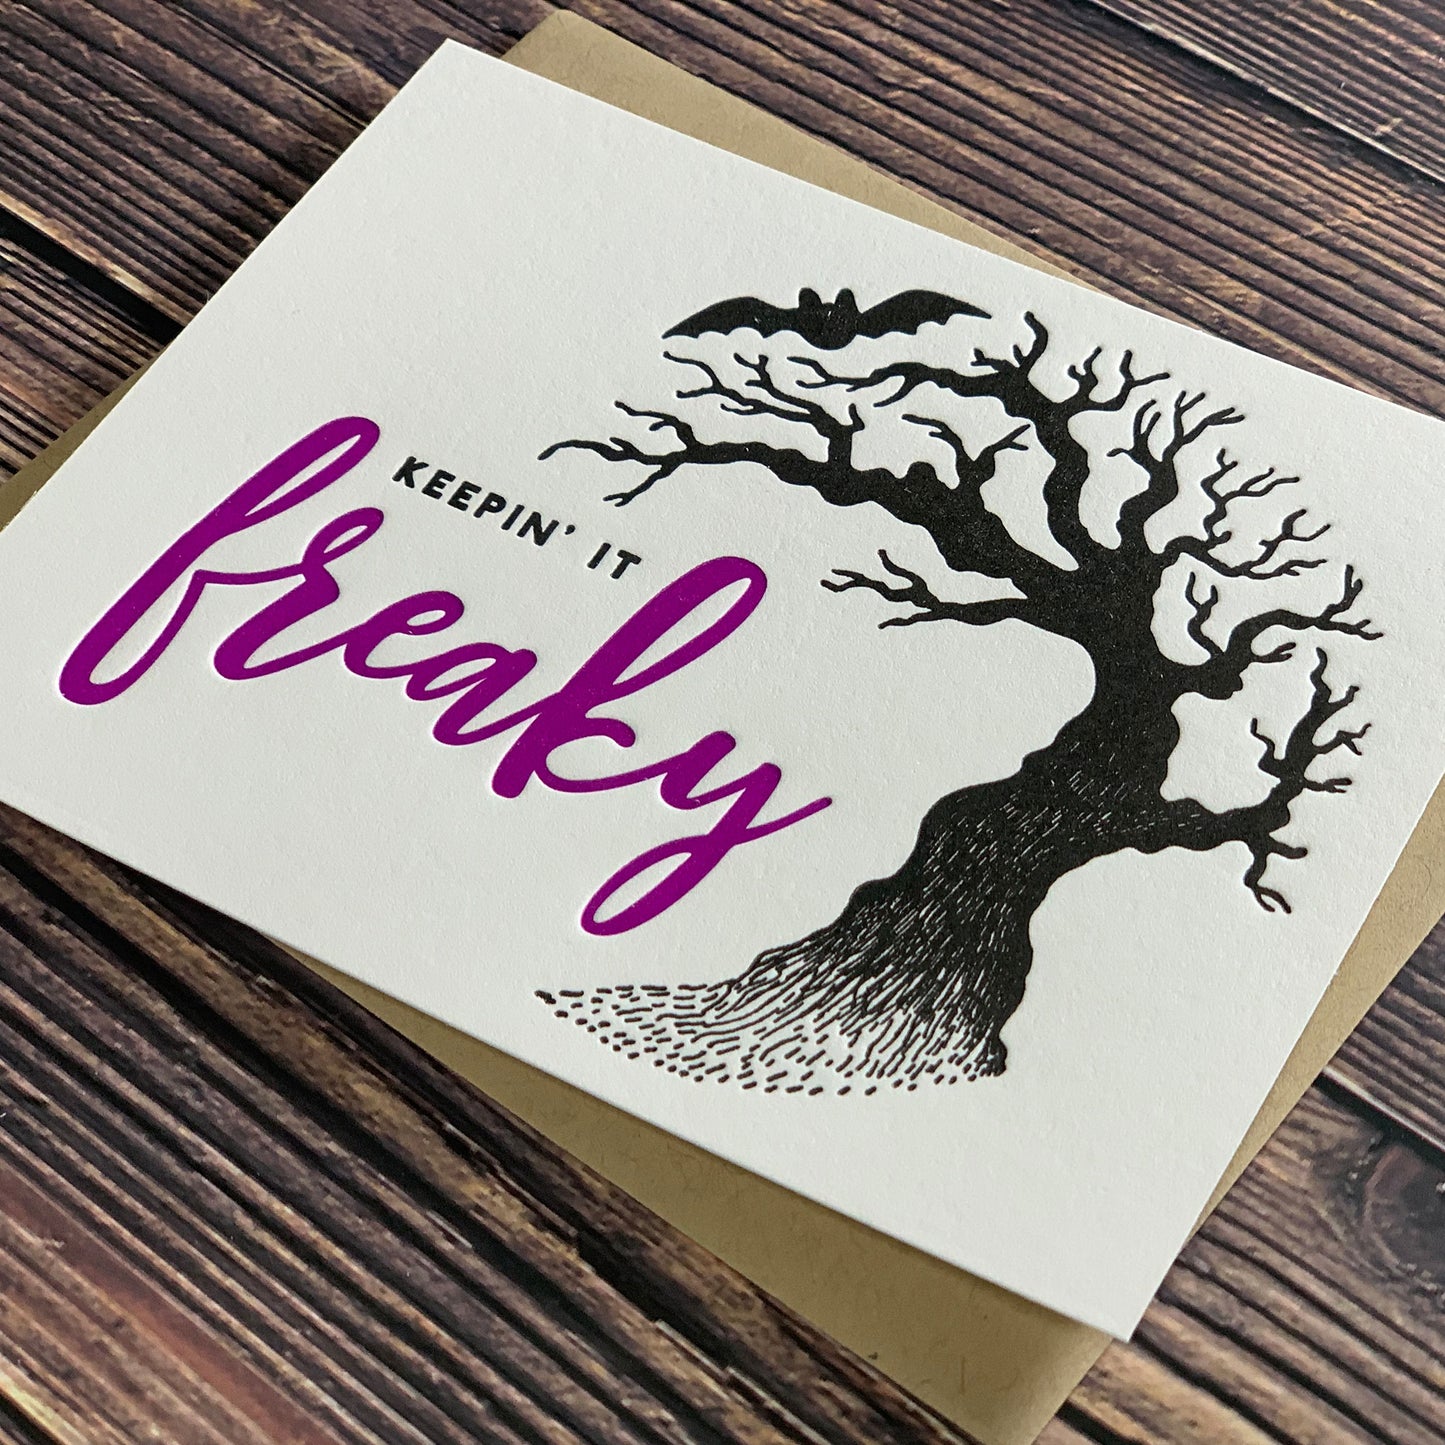 Keepin' It Freaky, Happy Halloween Card, Letterpress printed, view shows letterpress impression, includes envelope